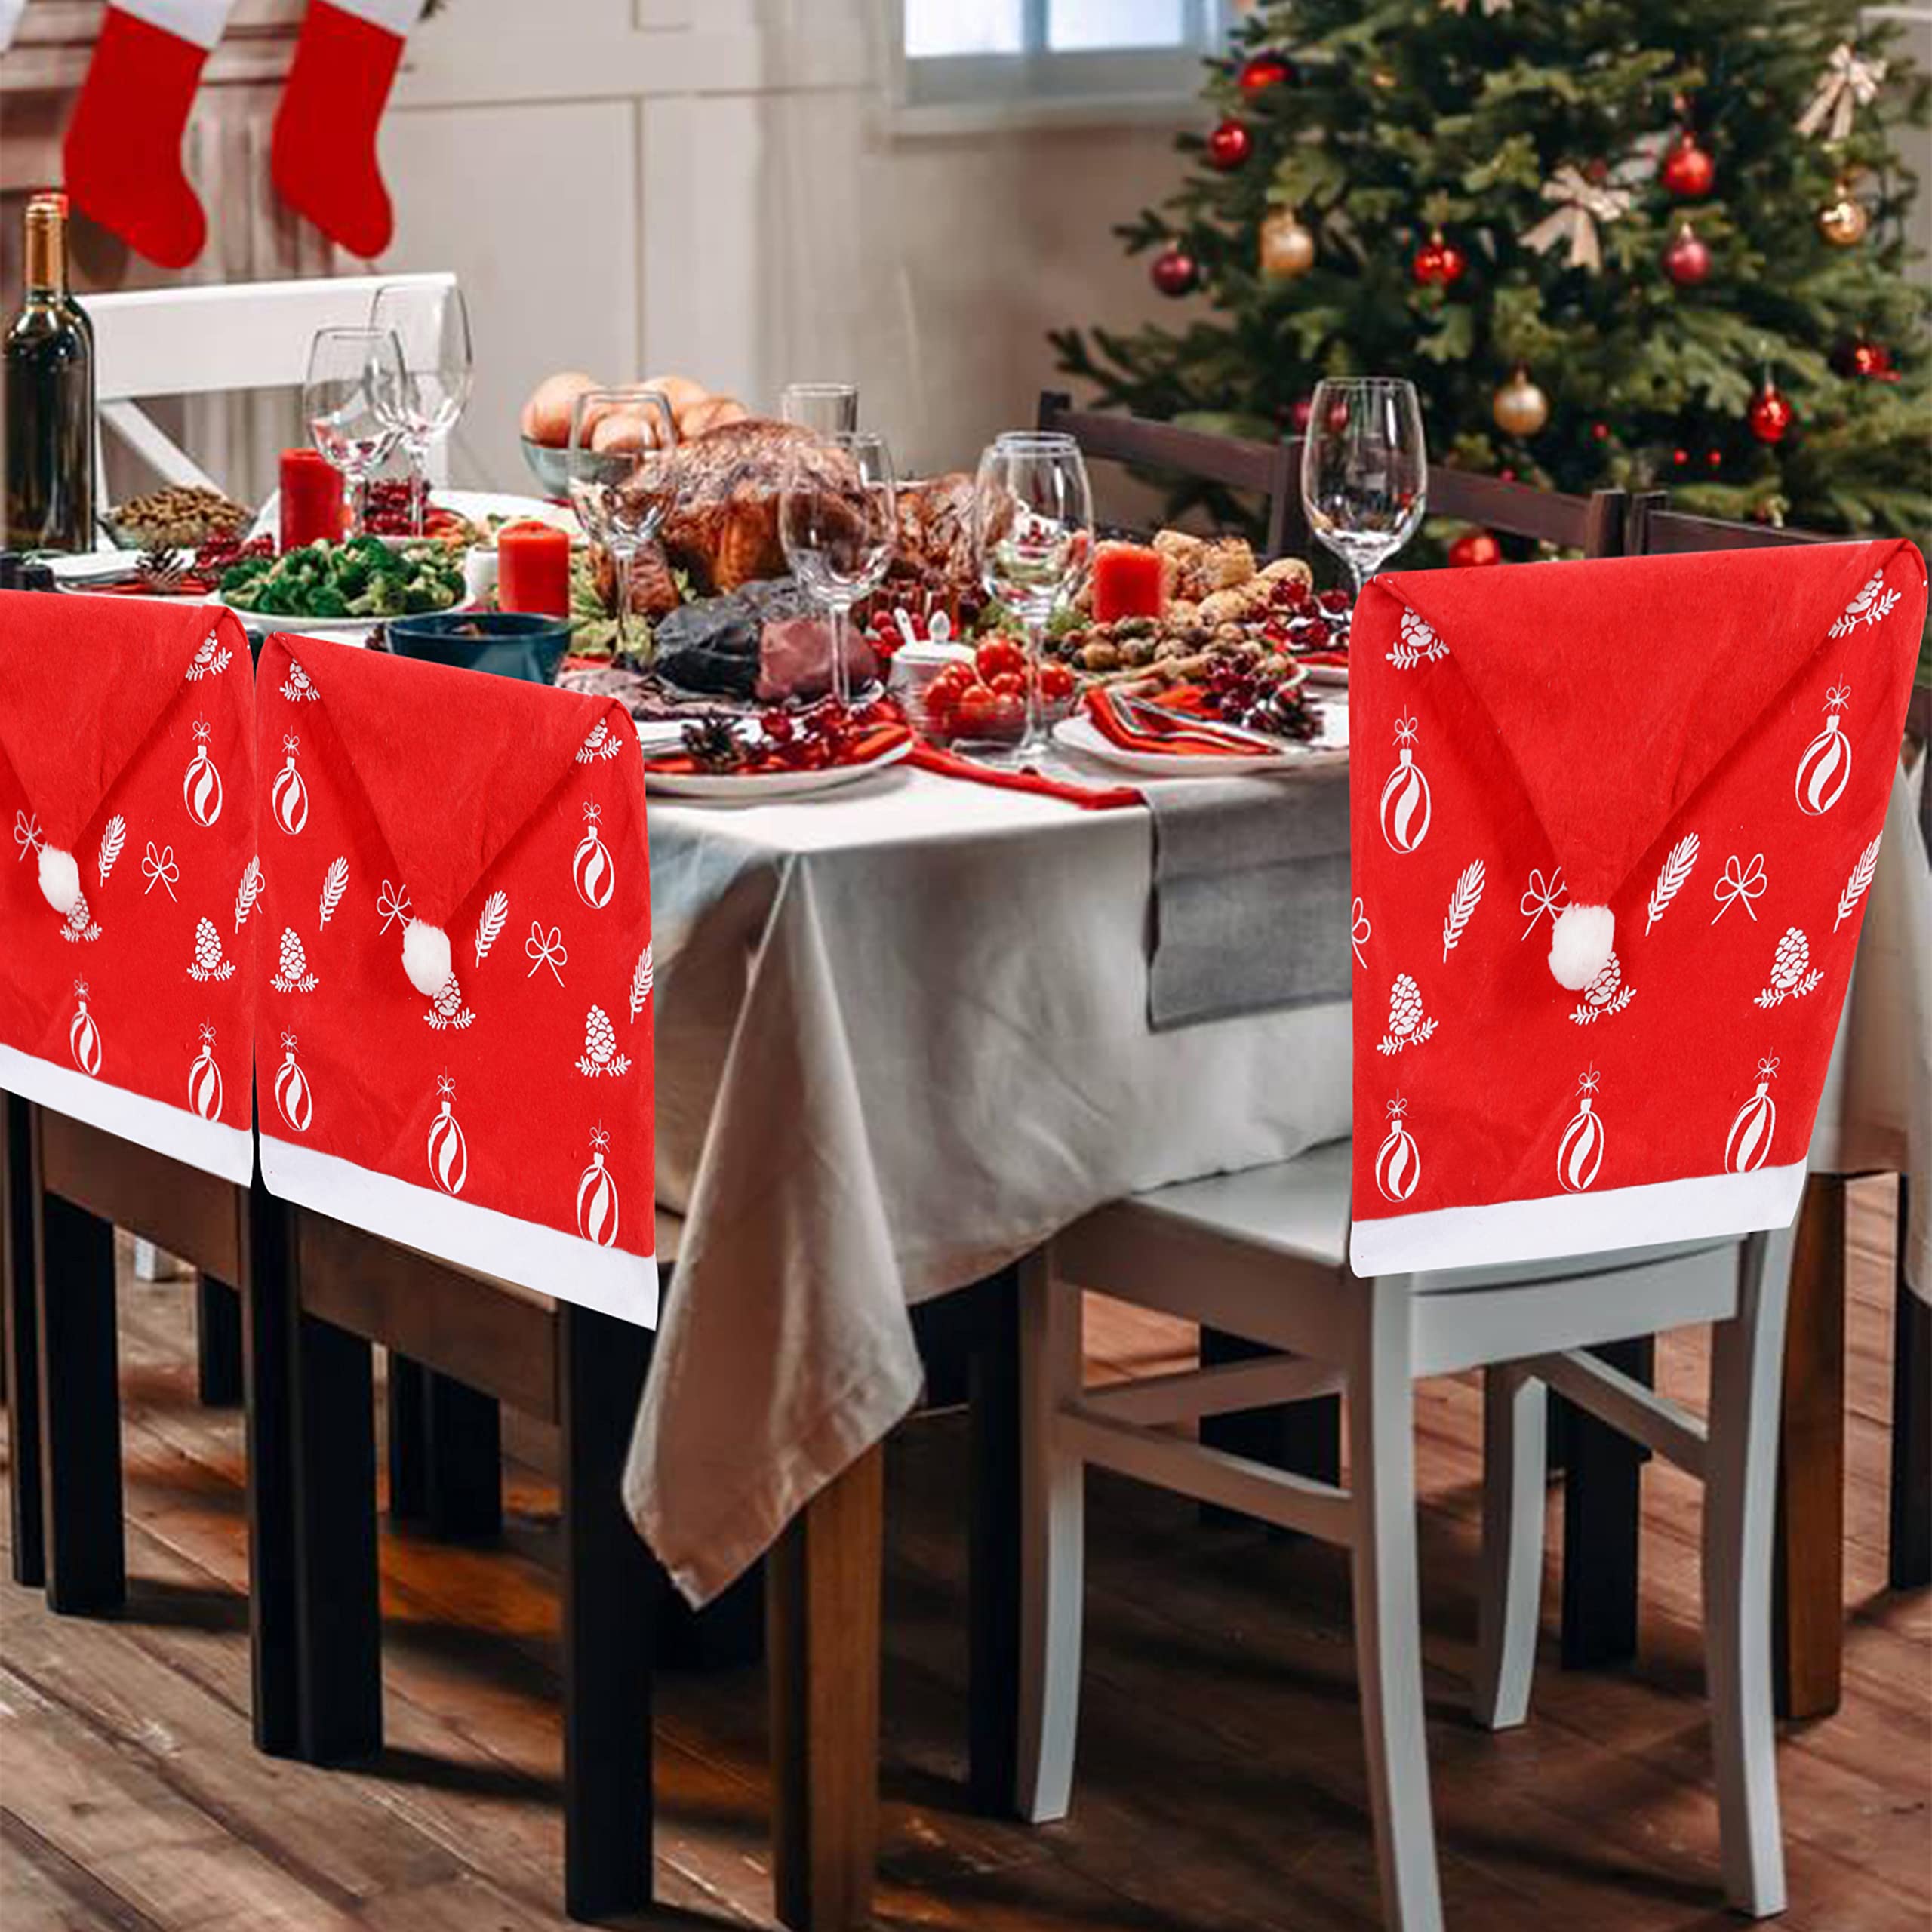 2Pcs Christmas Chair Back Covers Santa Hat Chair Covers for Home, Kitchen, Dining Room Decor KGORGE Store